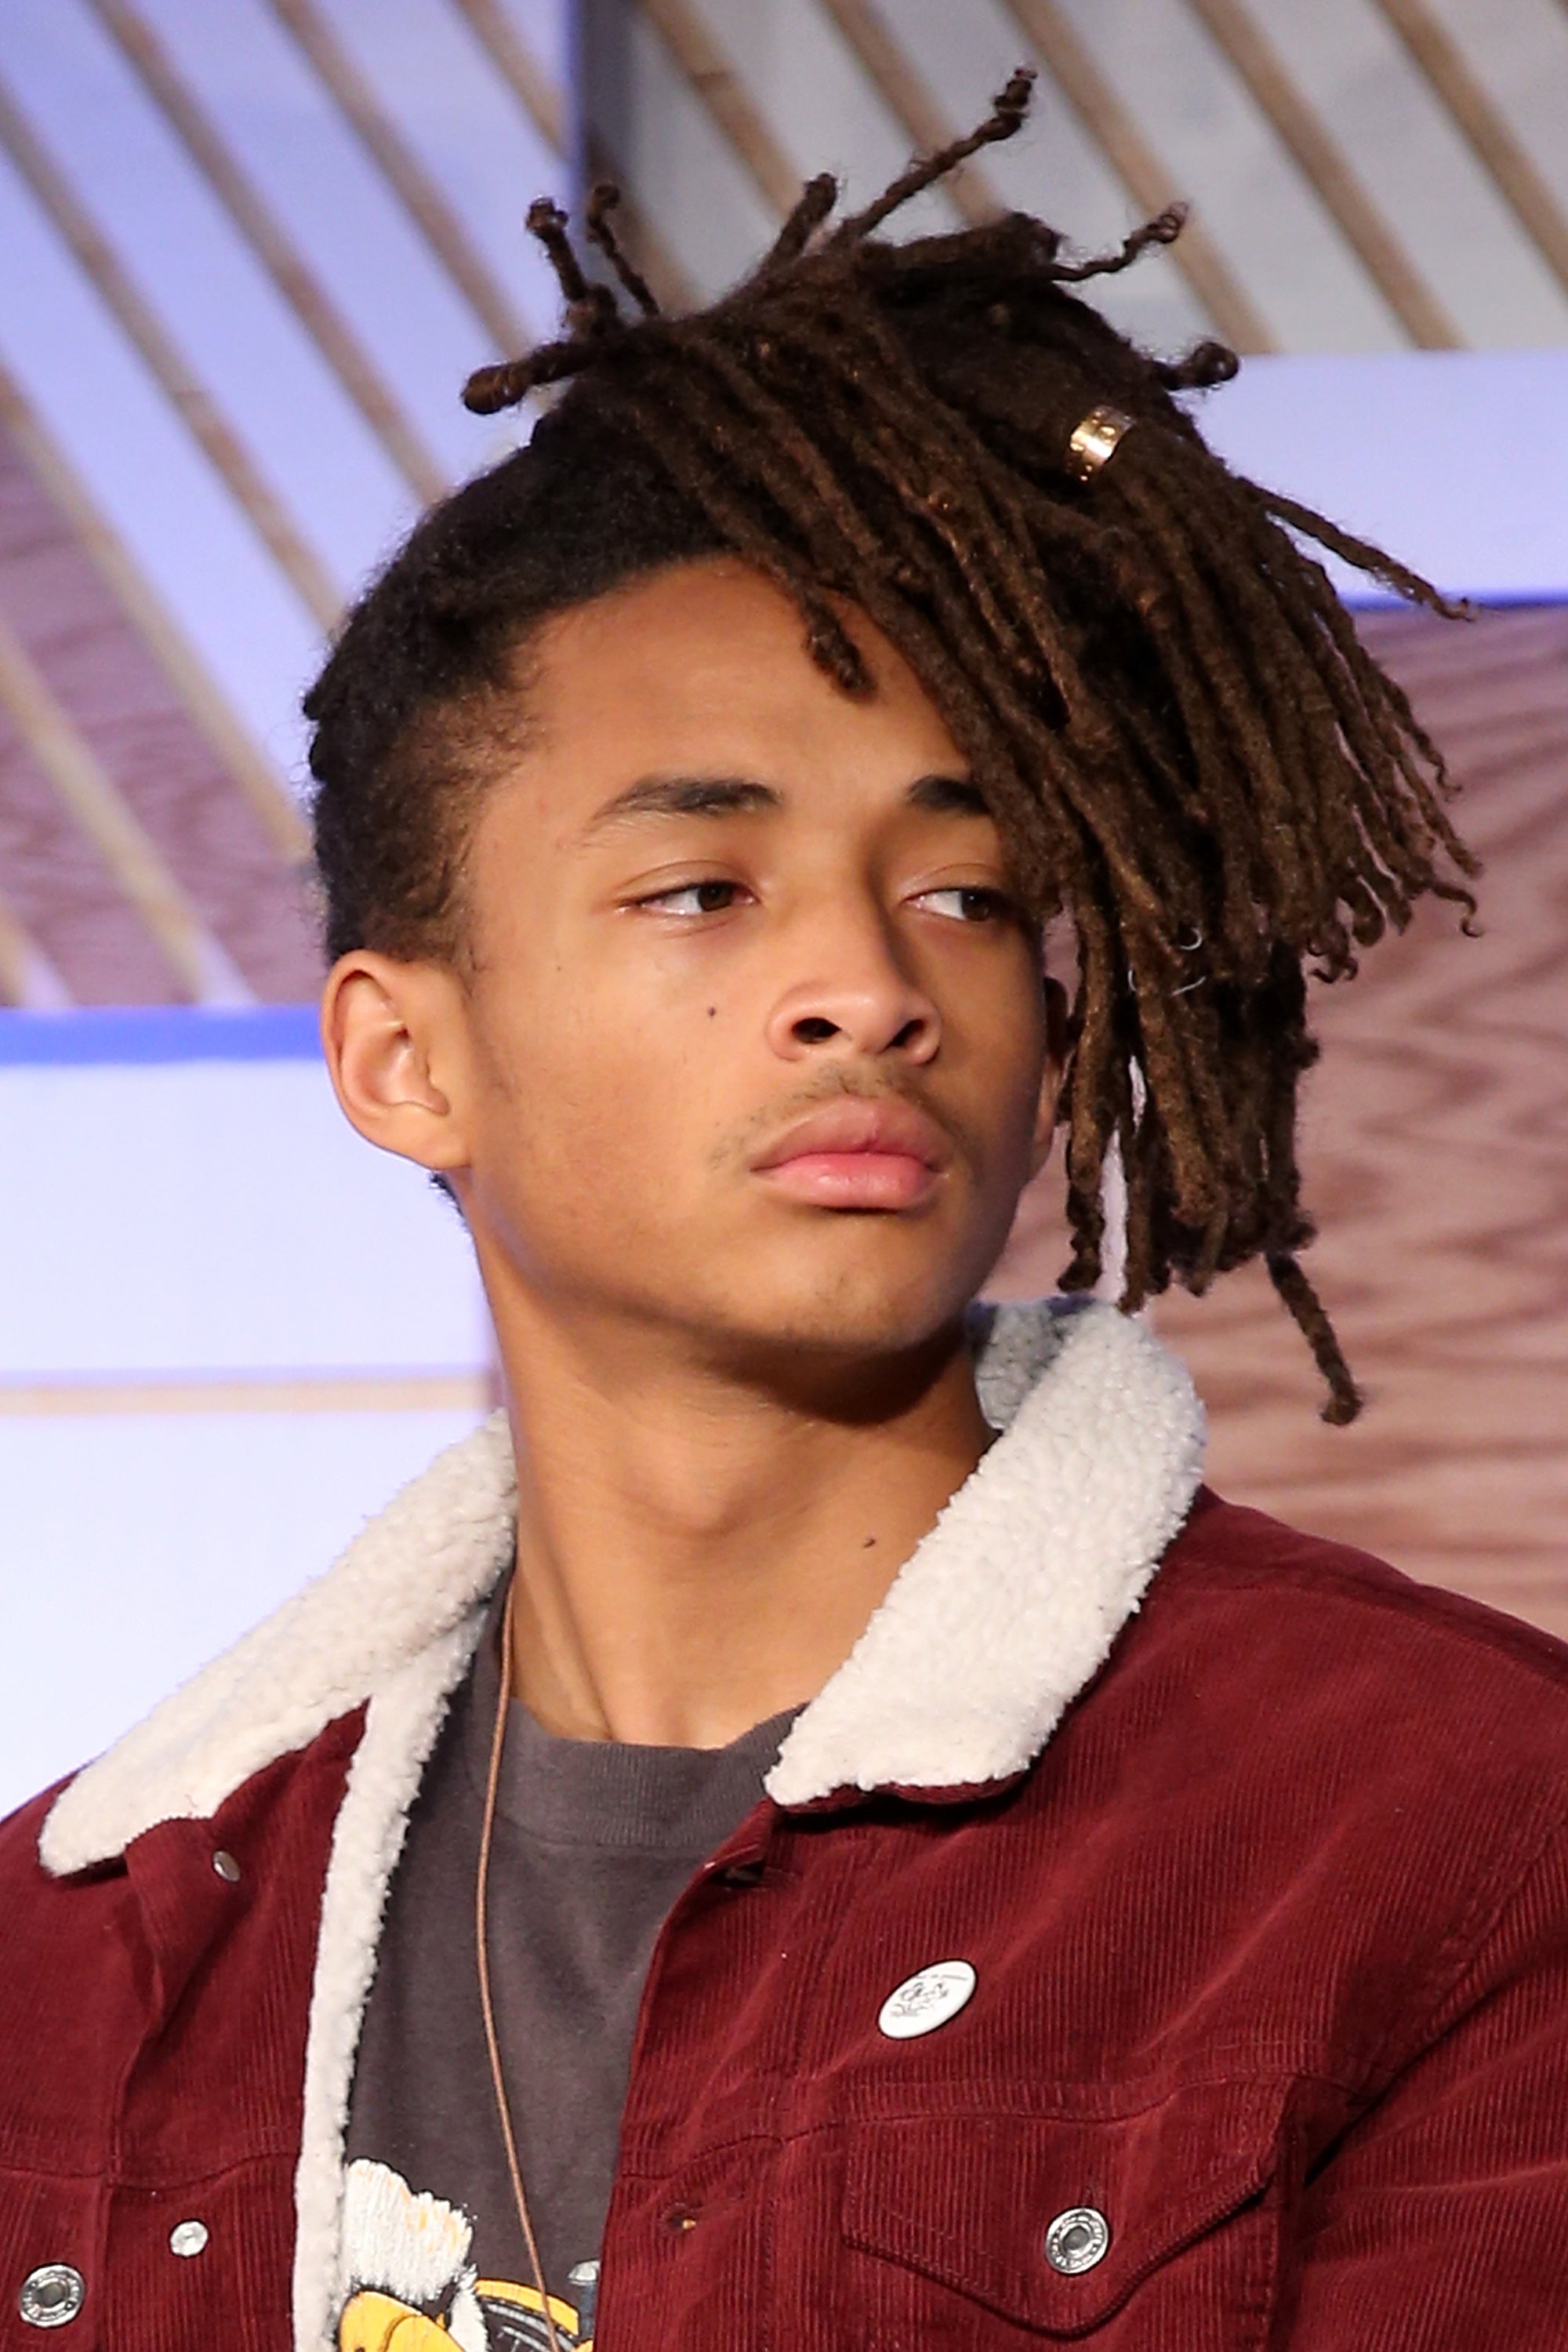 Jaden Smith Doesn't Look Like This Anymore
